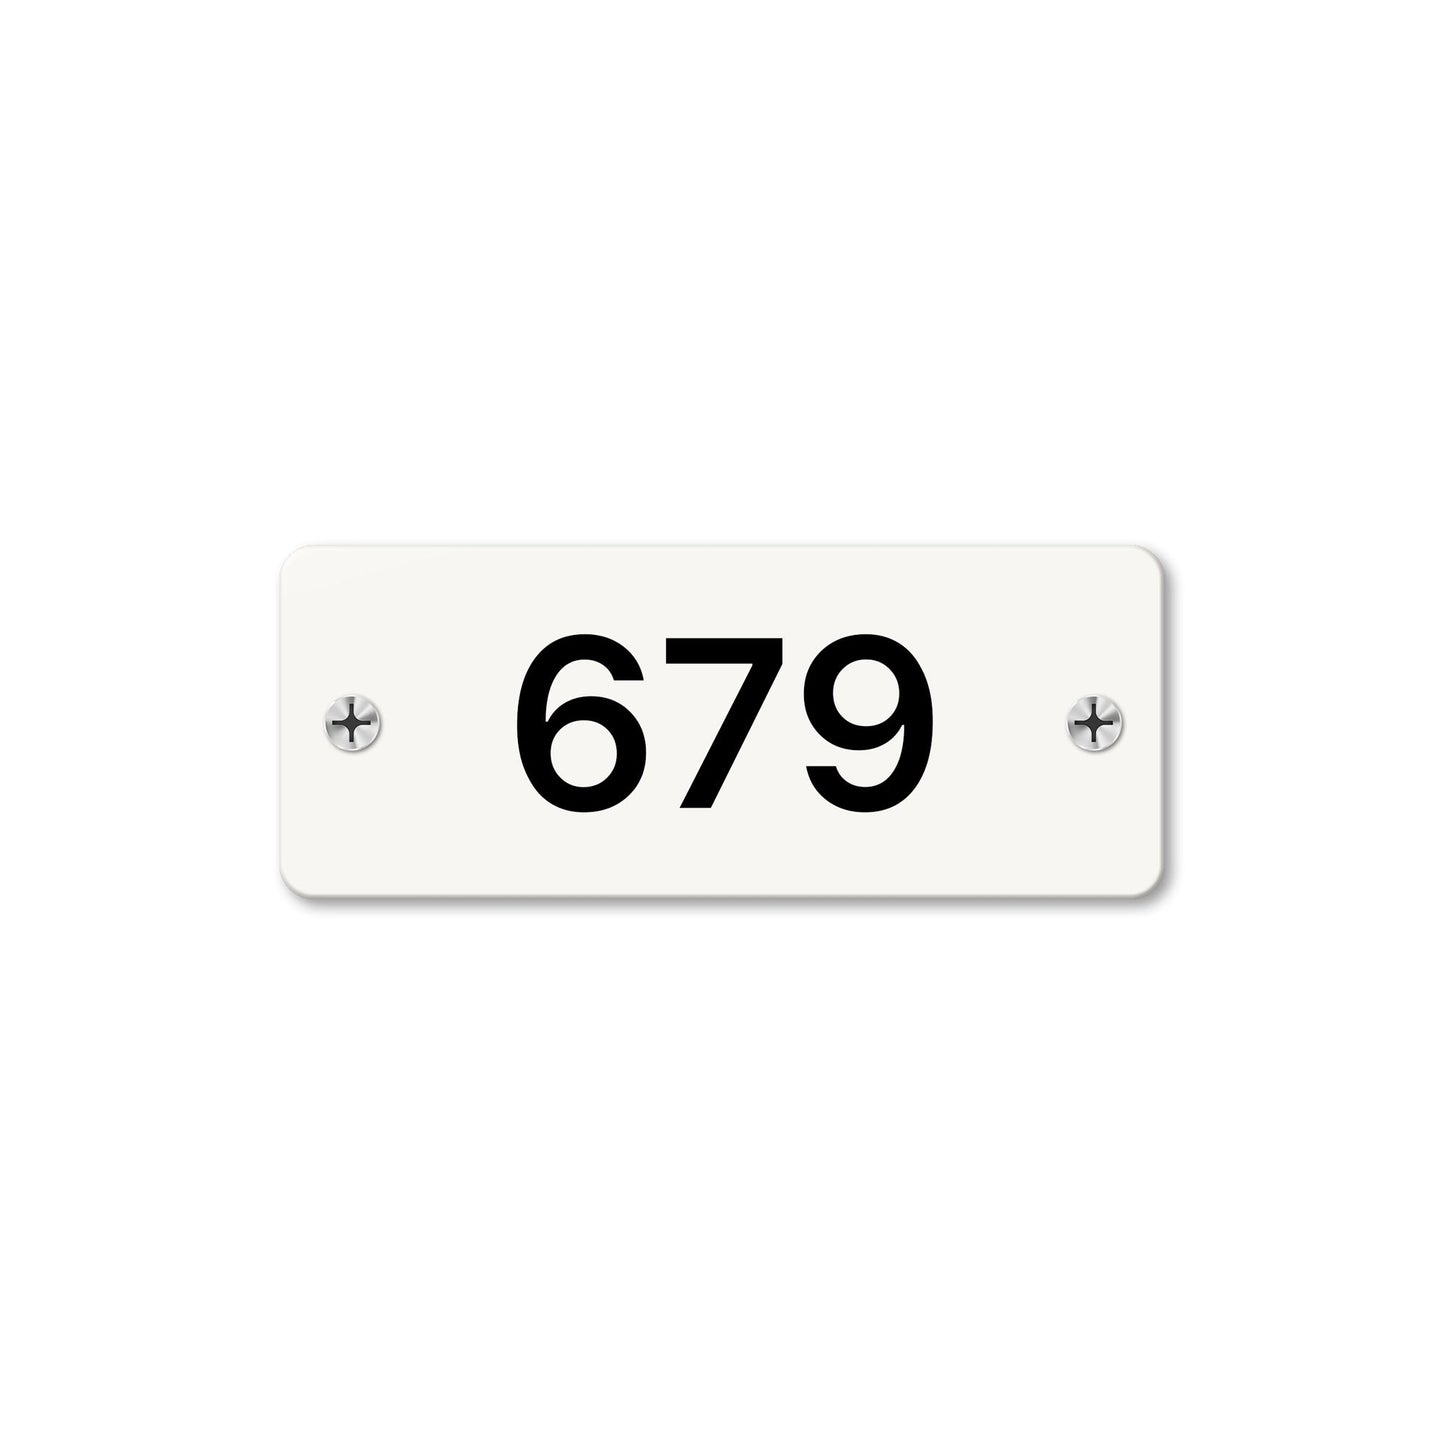 Numeral 679